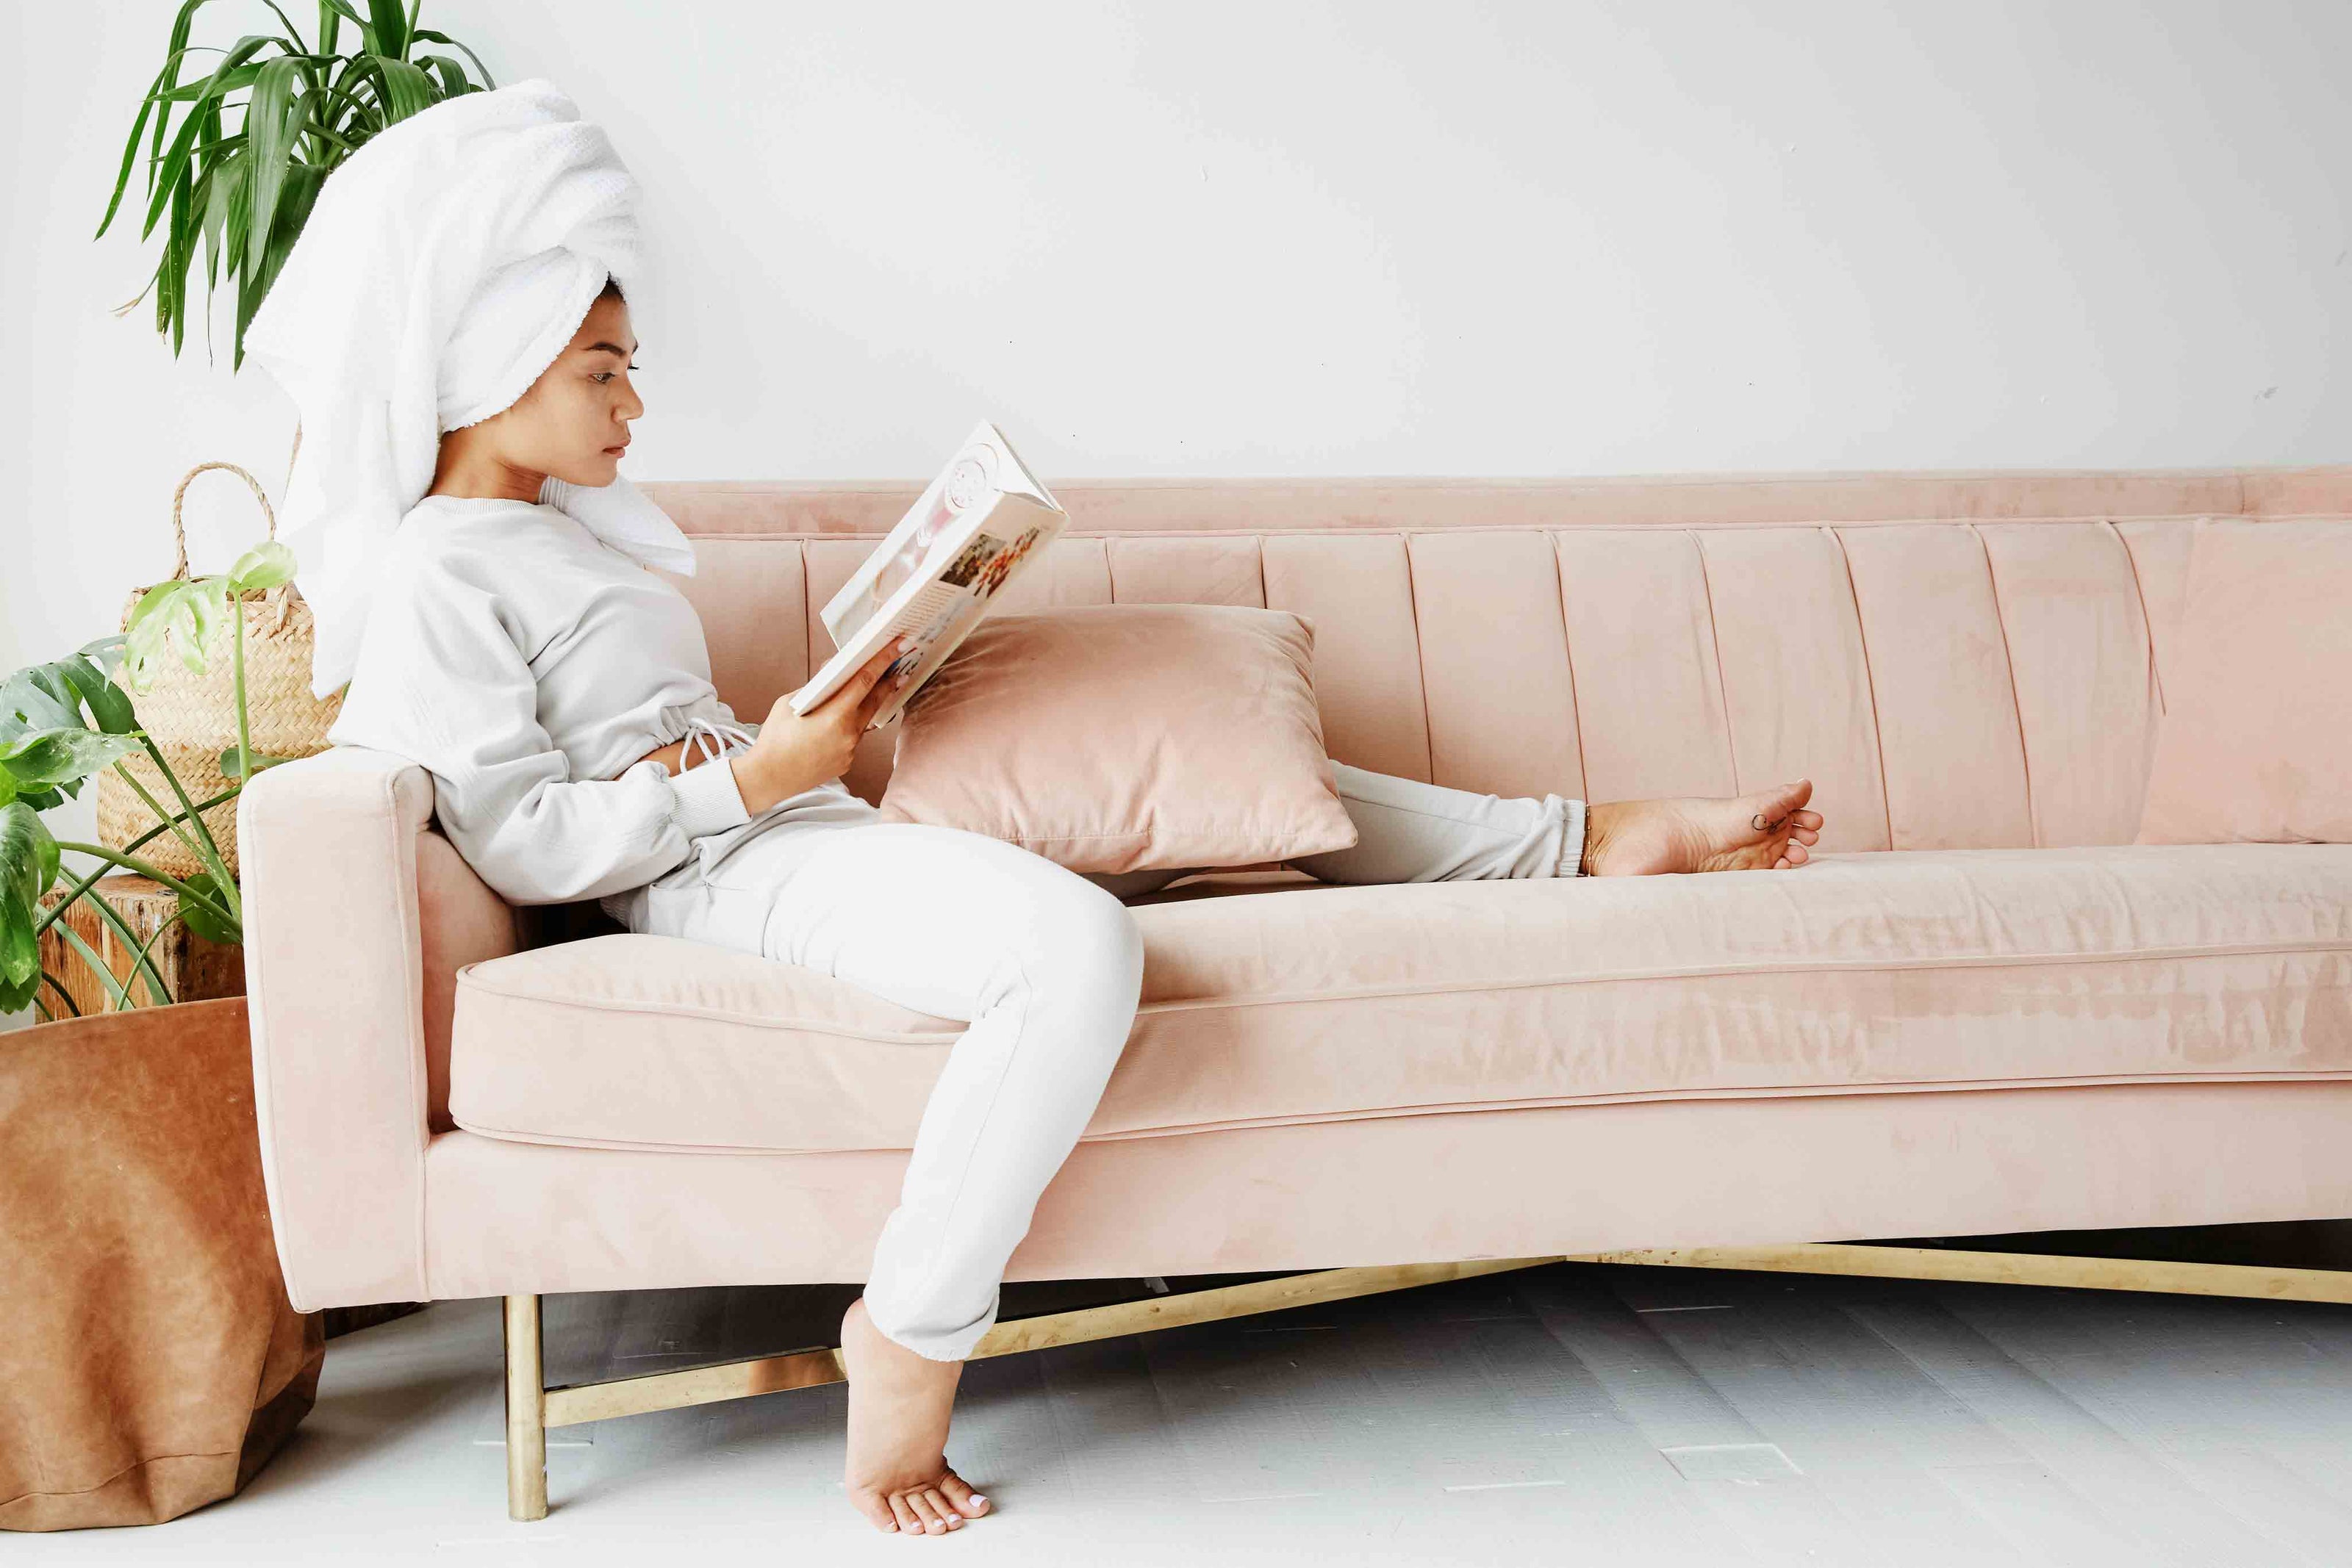 Girl on a couch with kanartic air conditionner